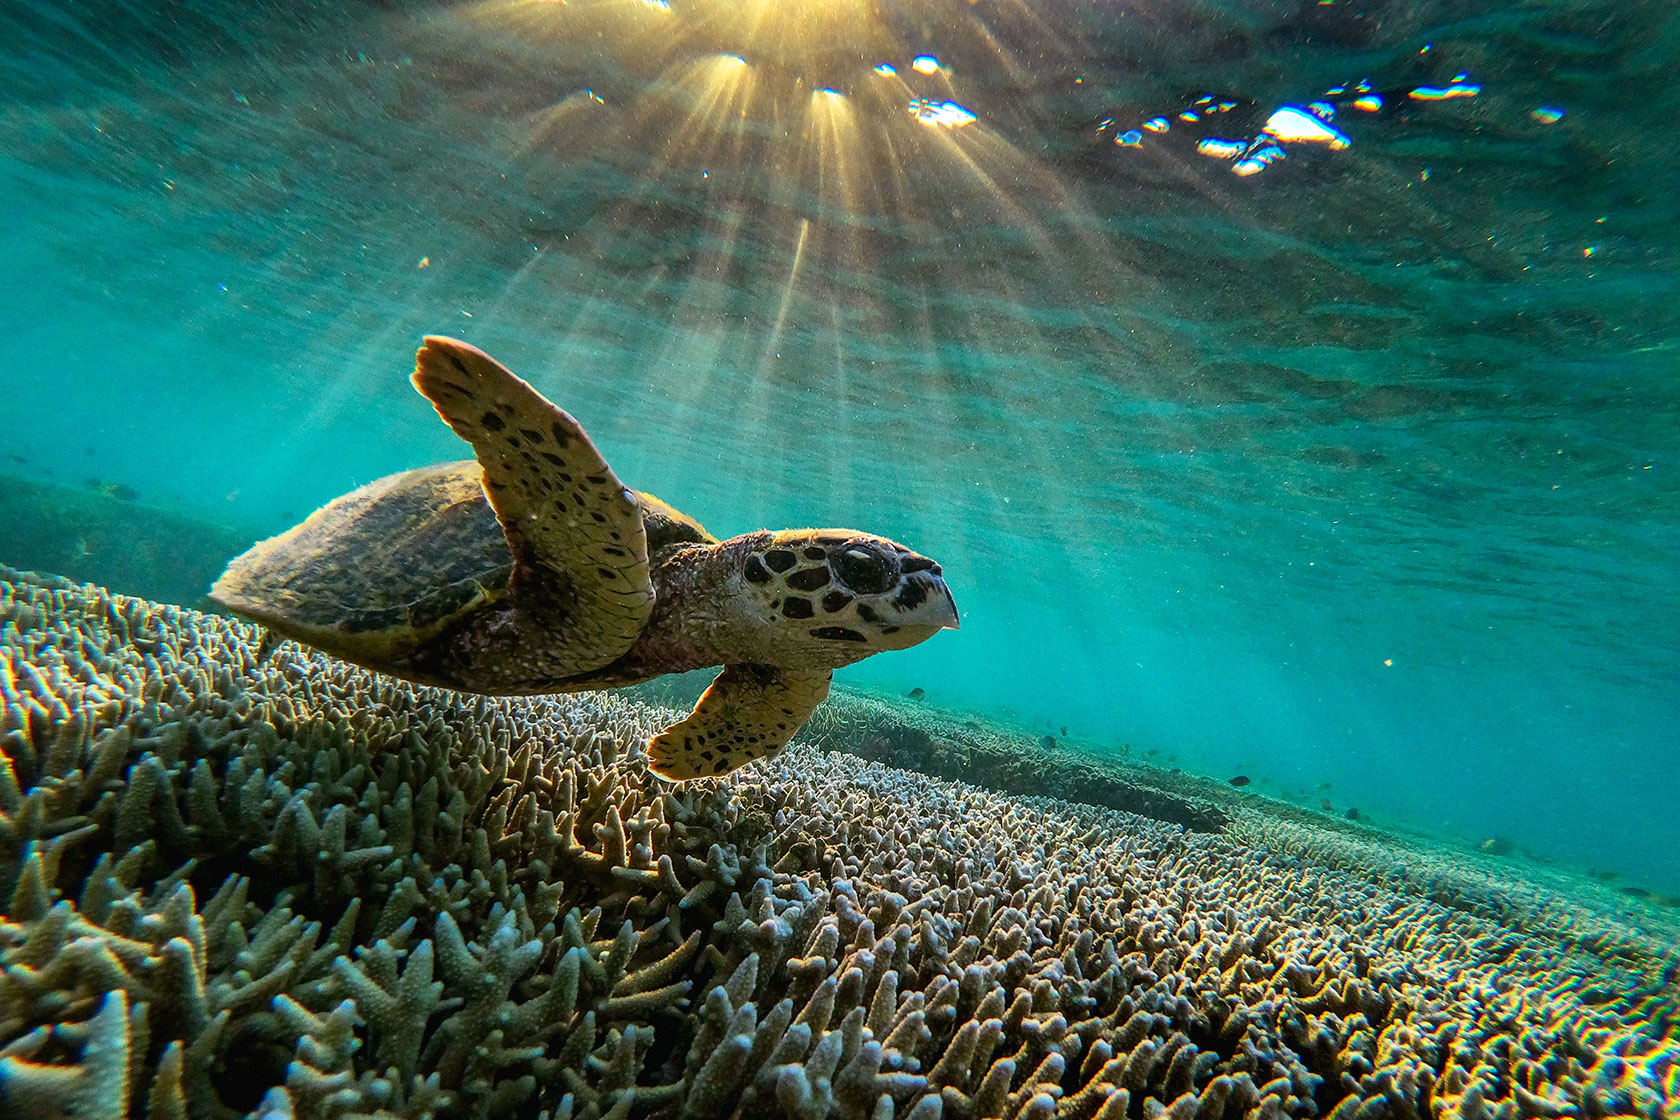 A green sea turtle swims among the corals of Lady Elliot Island.